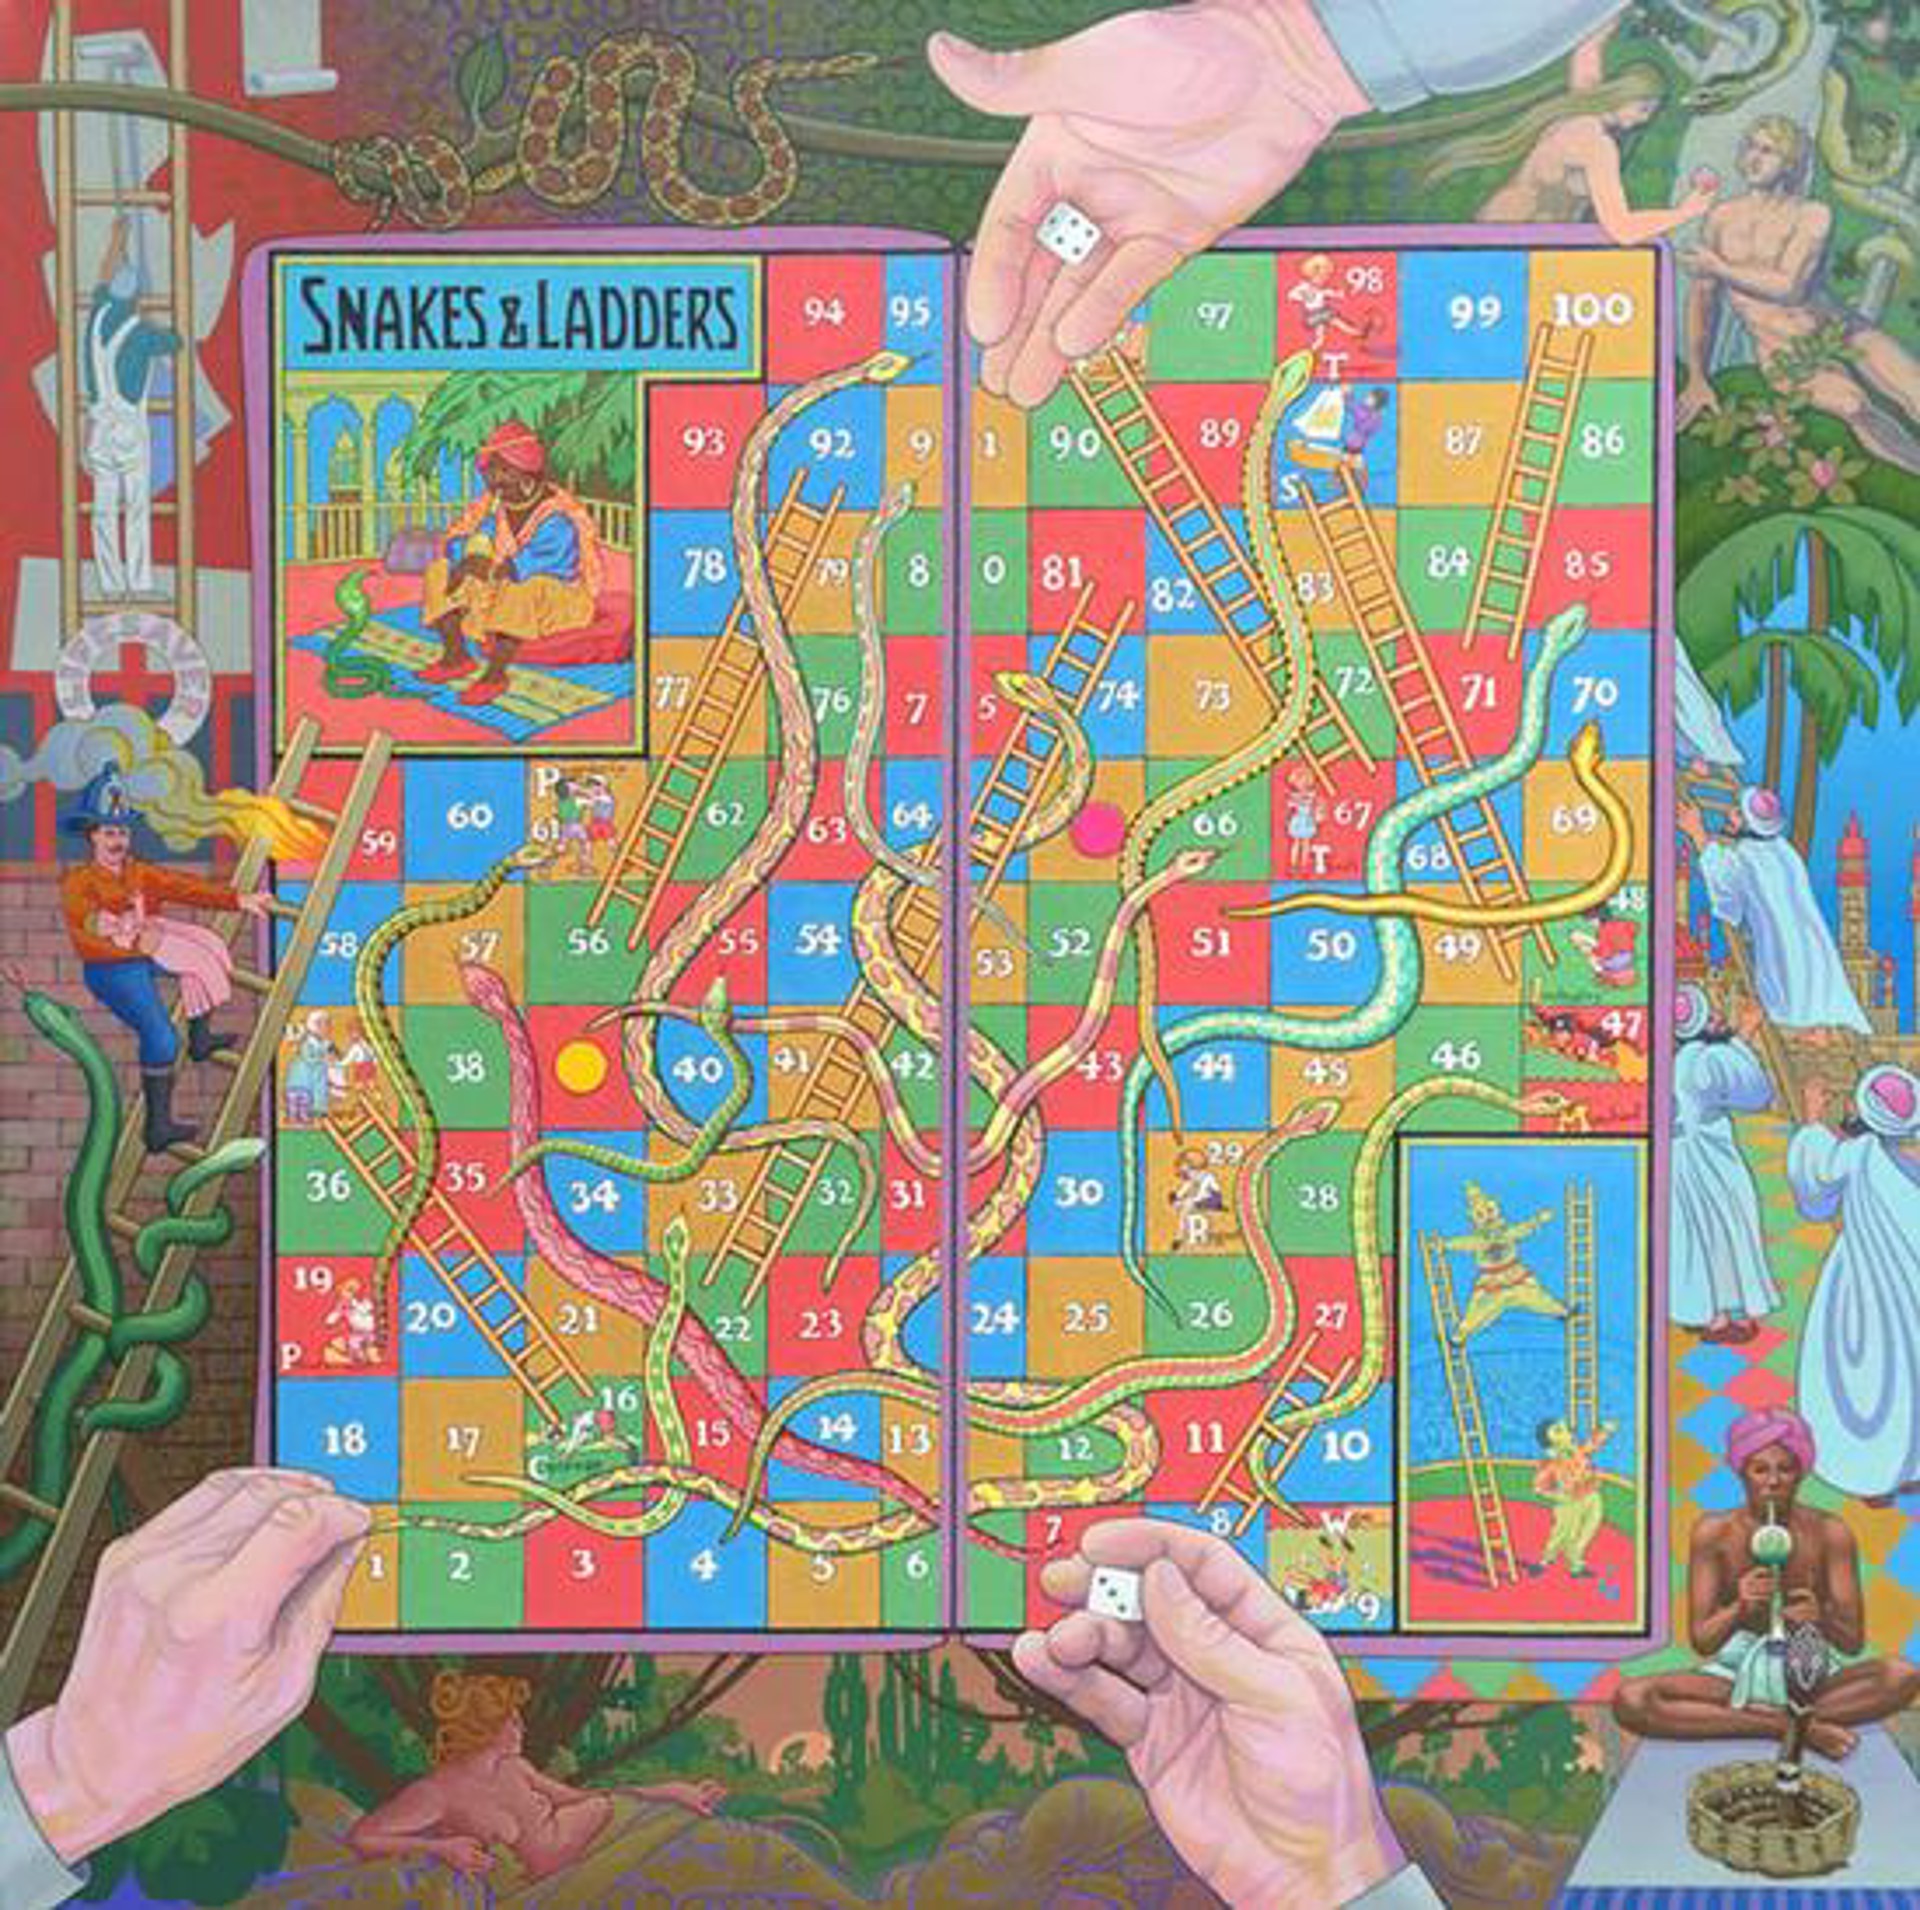 Snakes & Ladders by Luther Pokrant